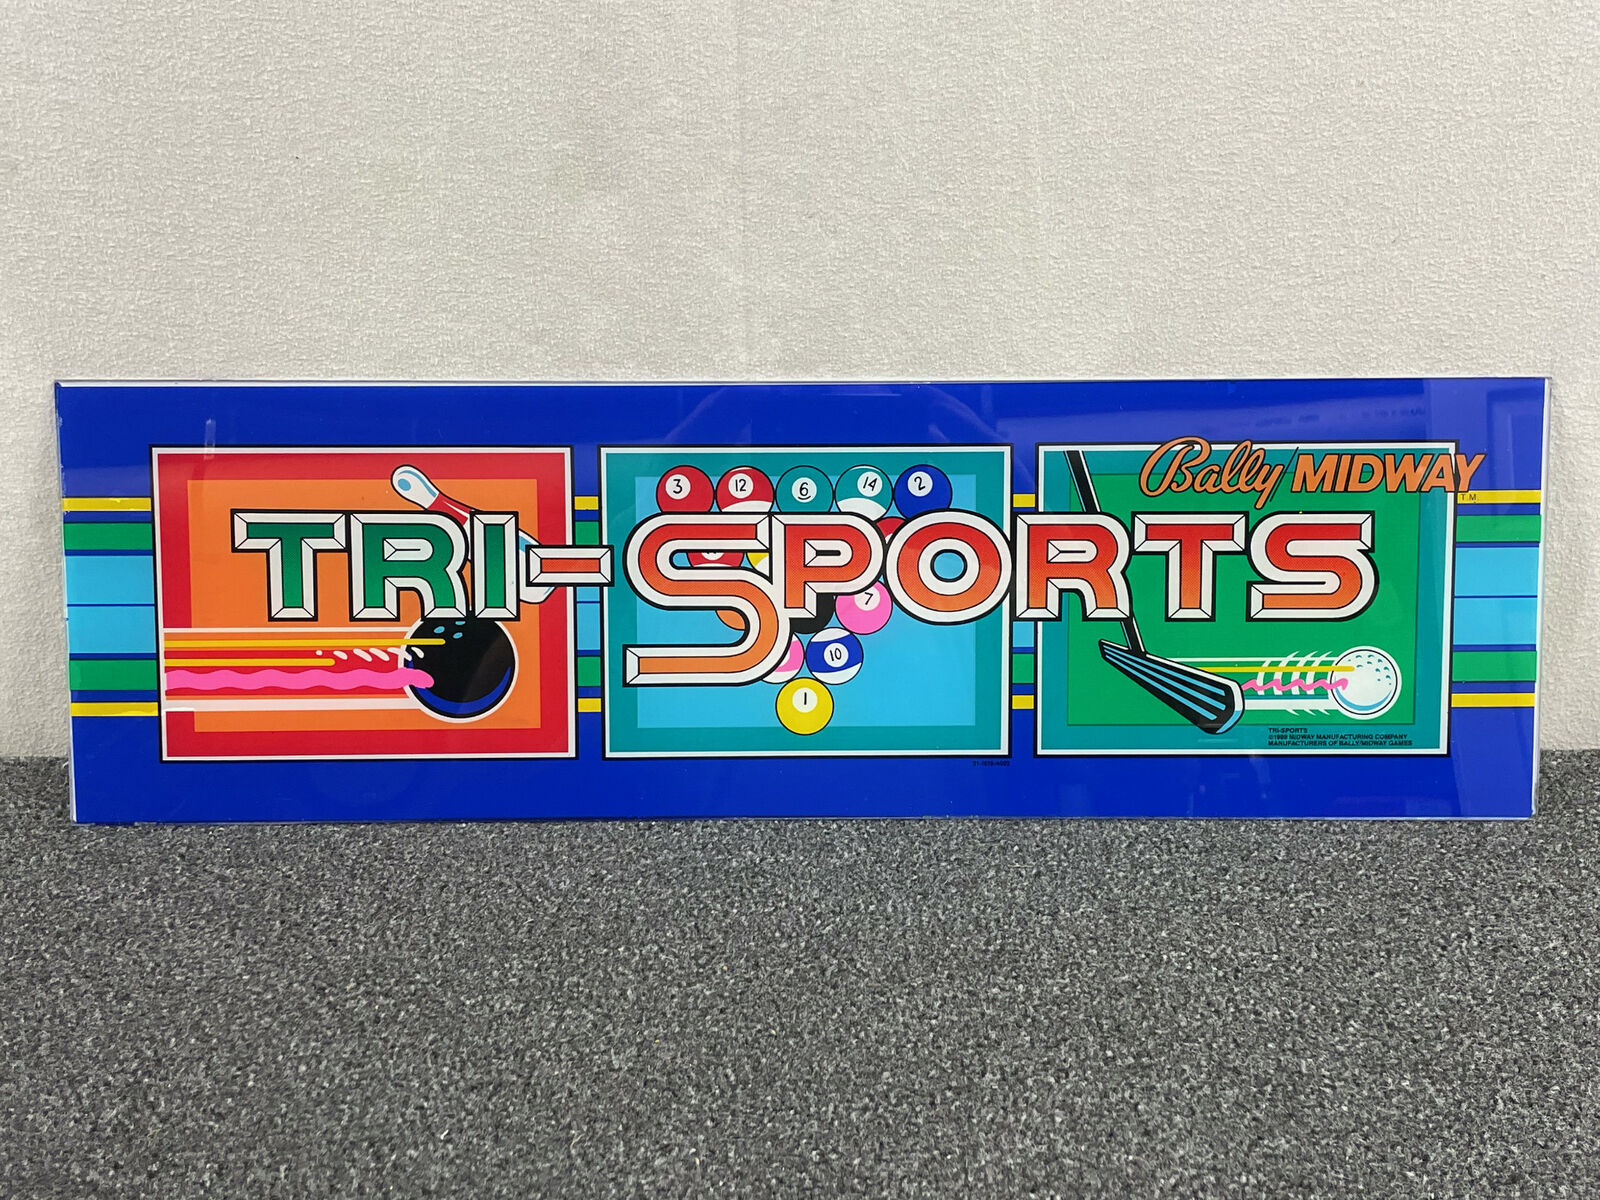 Bally Midway Tri-Sports Arcade Game Machine Backglass Marquee Header Panel